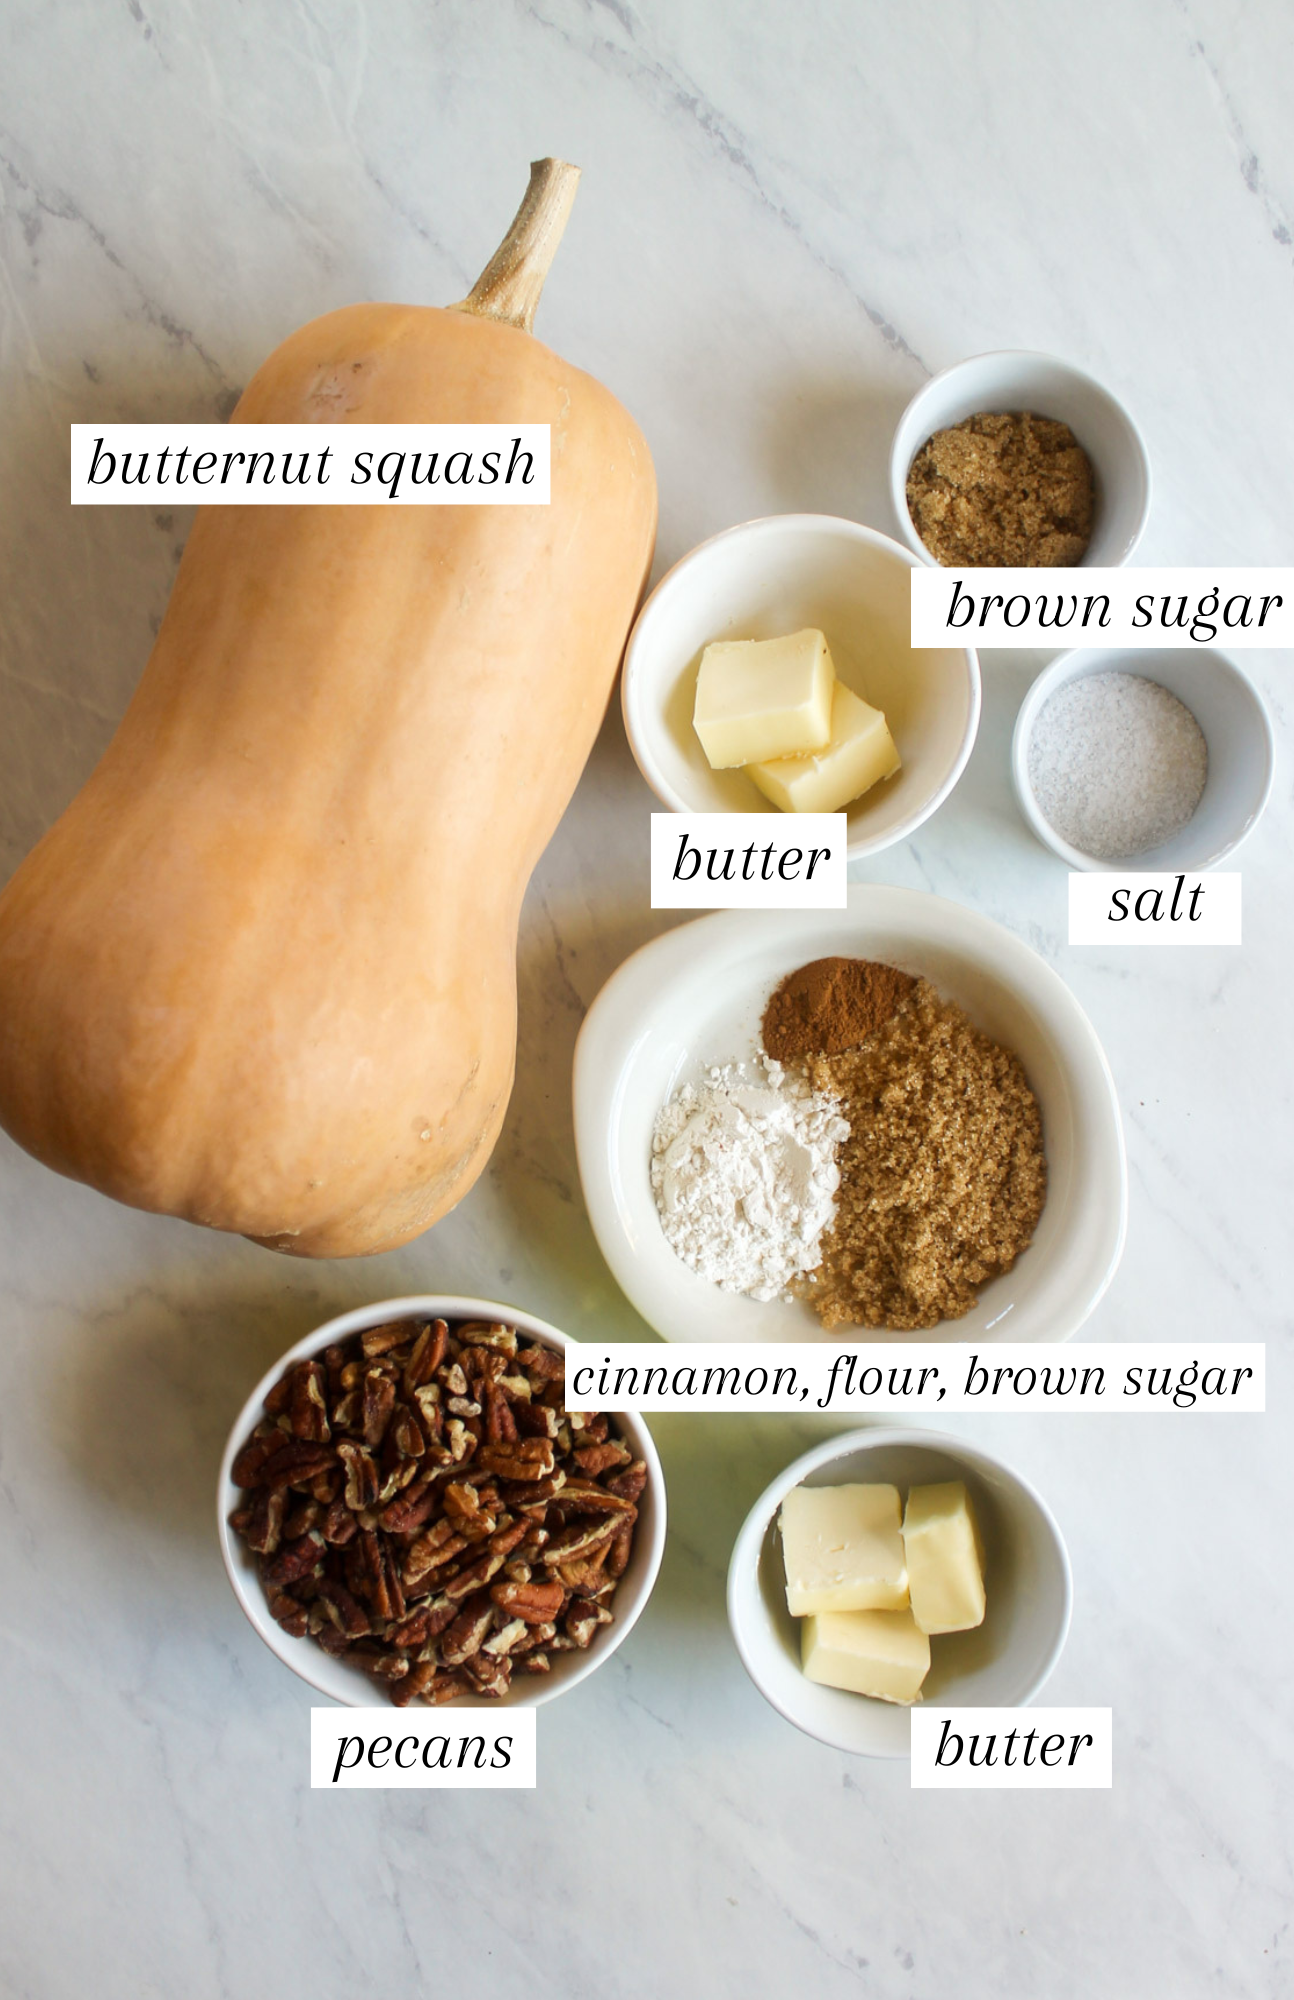 Labeled ingredients for butternut squash casserole on a white counter.